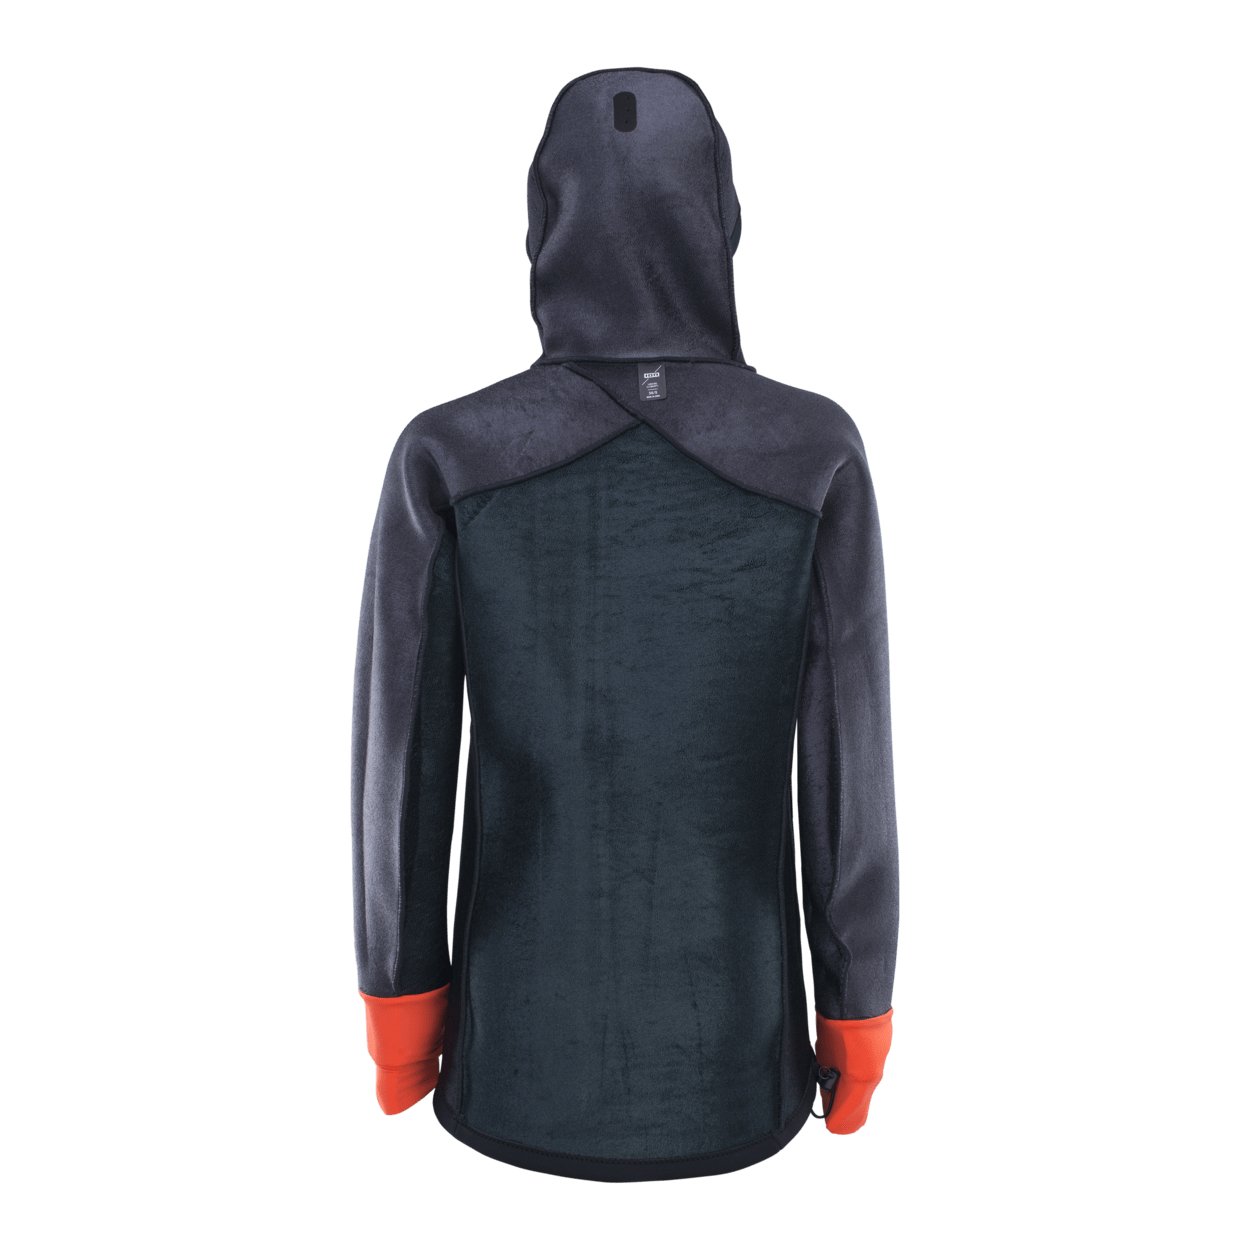 ION Neo Shelter Jacket Amp women 2023 - Worthing Watersports - 9010583118482 - Tops - ION Water